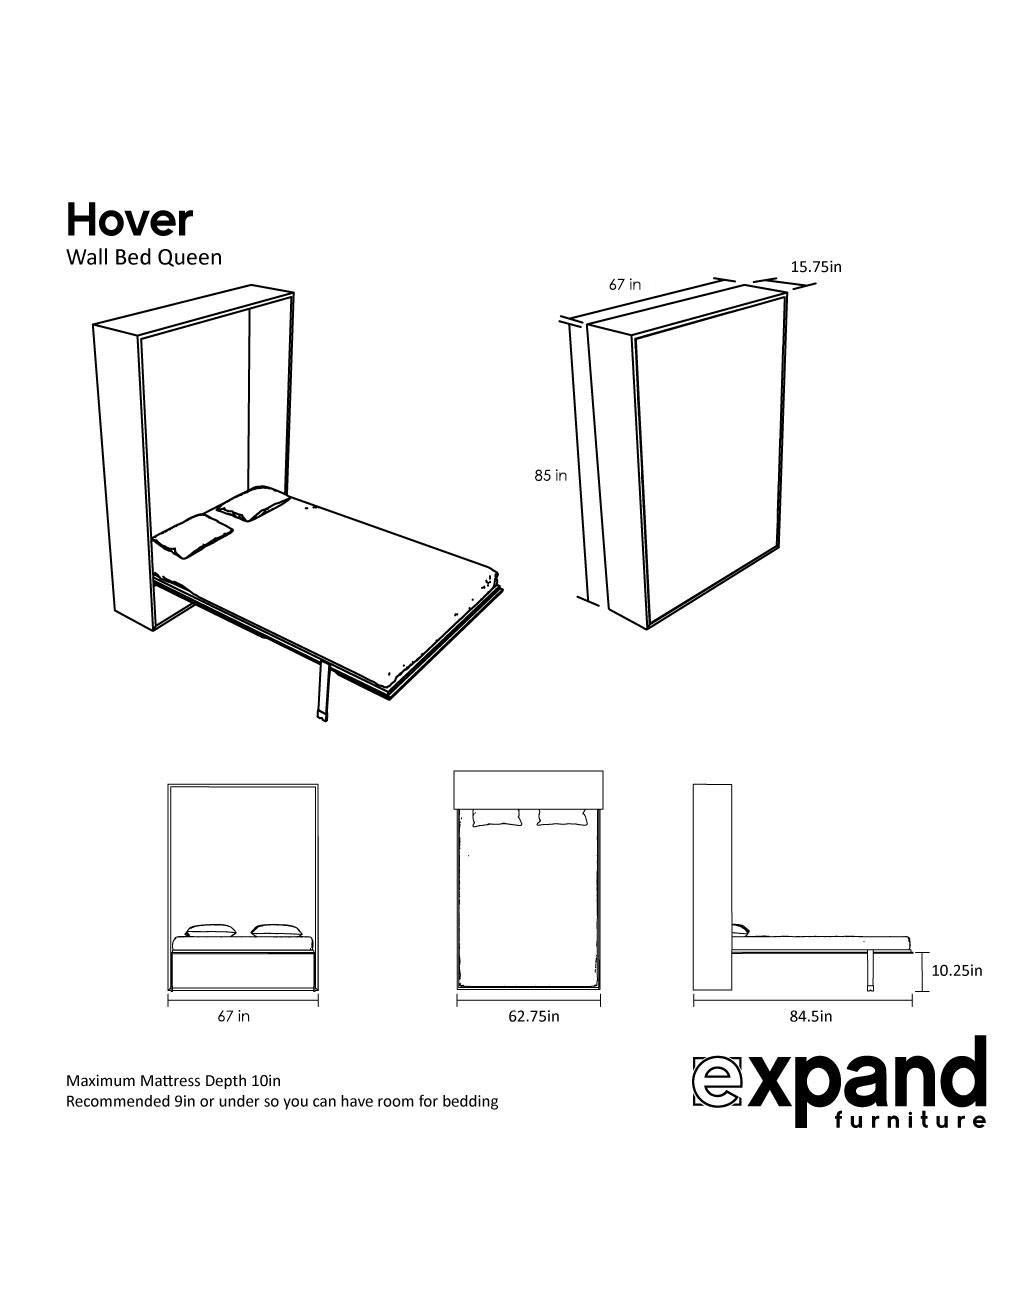 Hover - Compact Wall Bed Queen Size | Expand Furniture ...